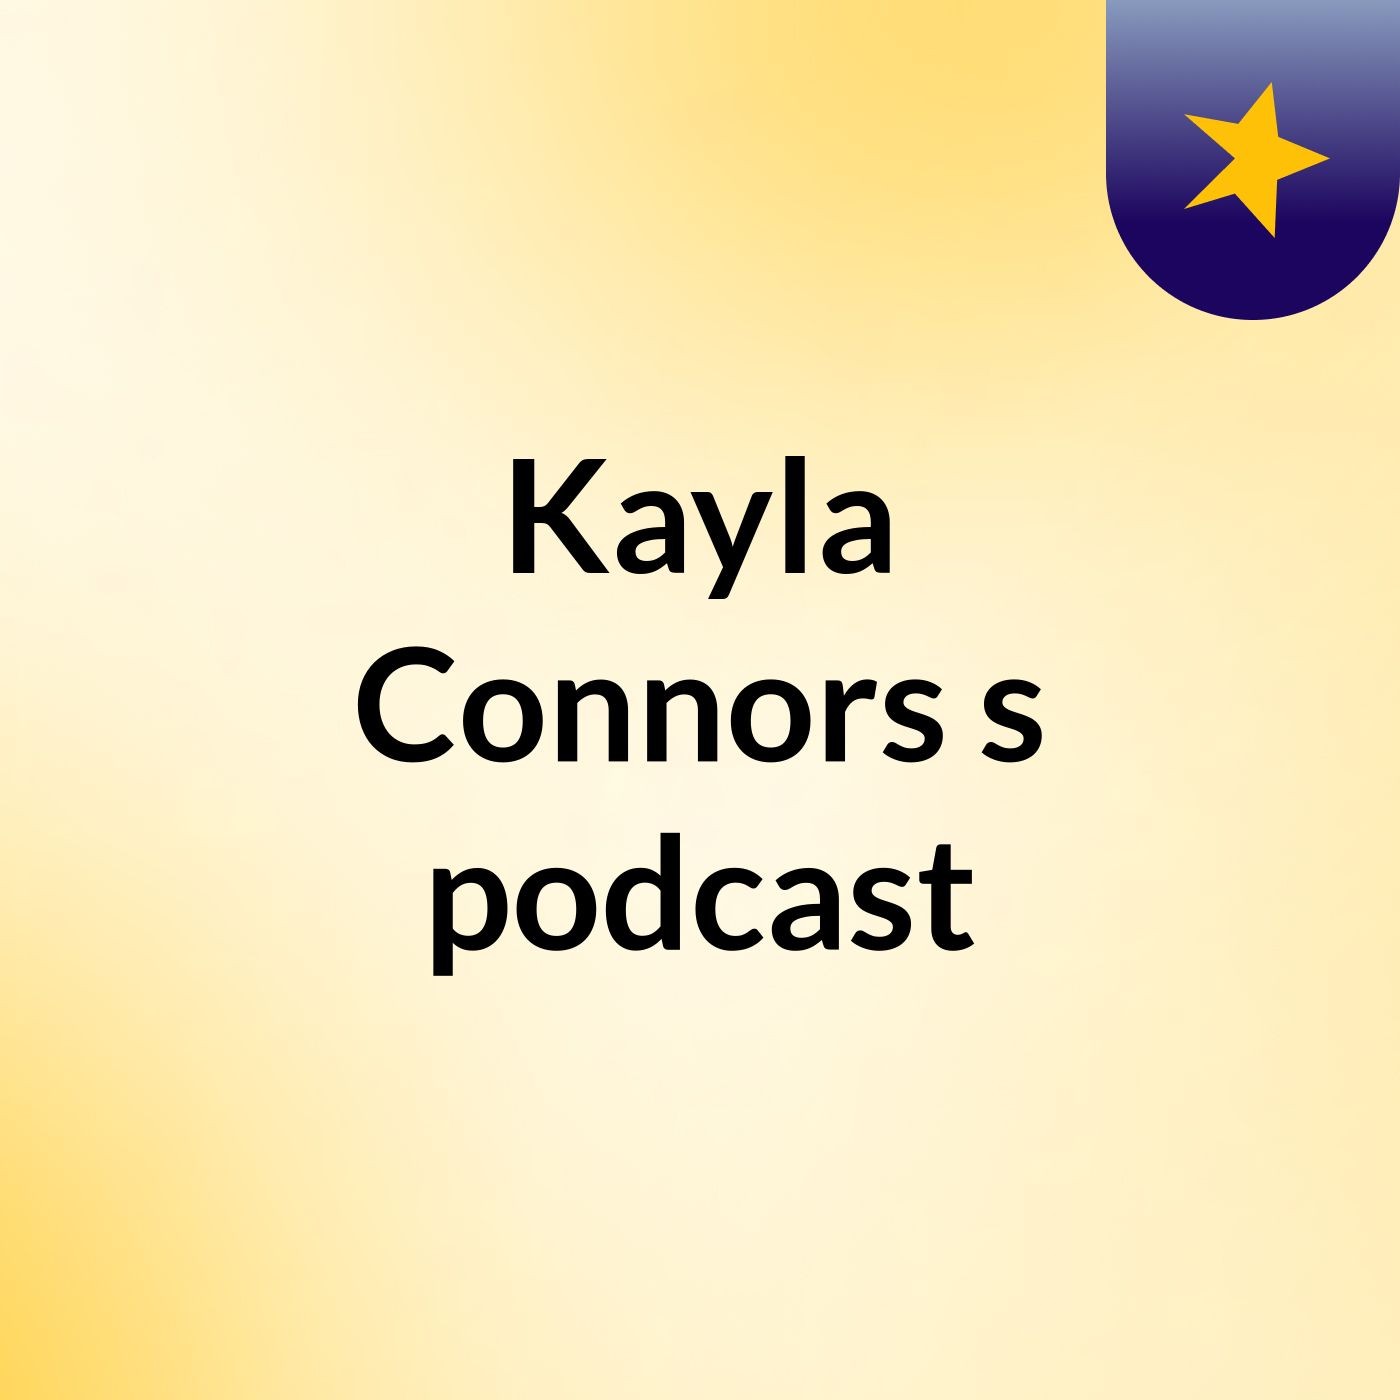 Kayla Connors's podcast